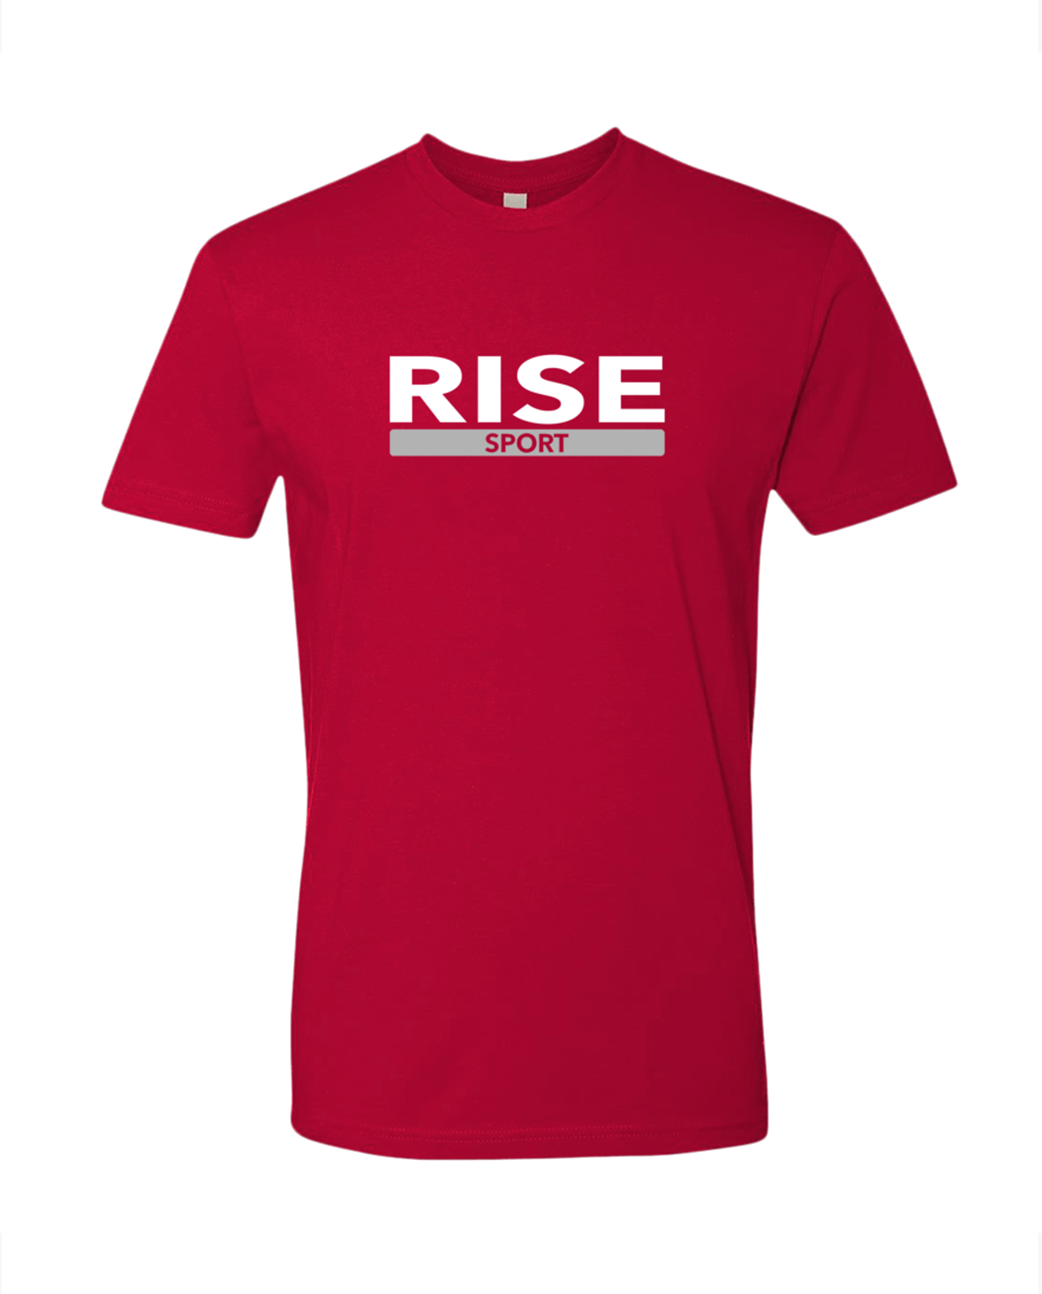 Rise Sport Signature T-shirt Tee Red